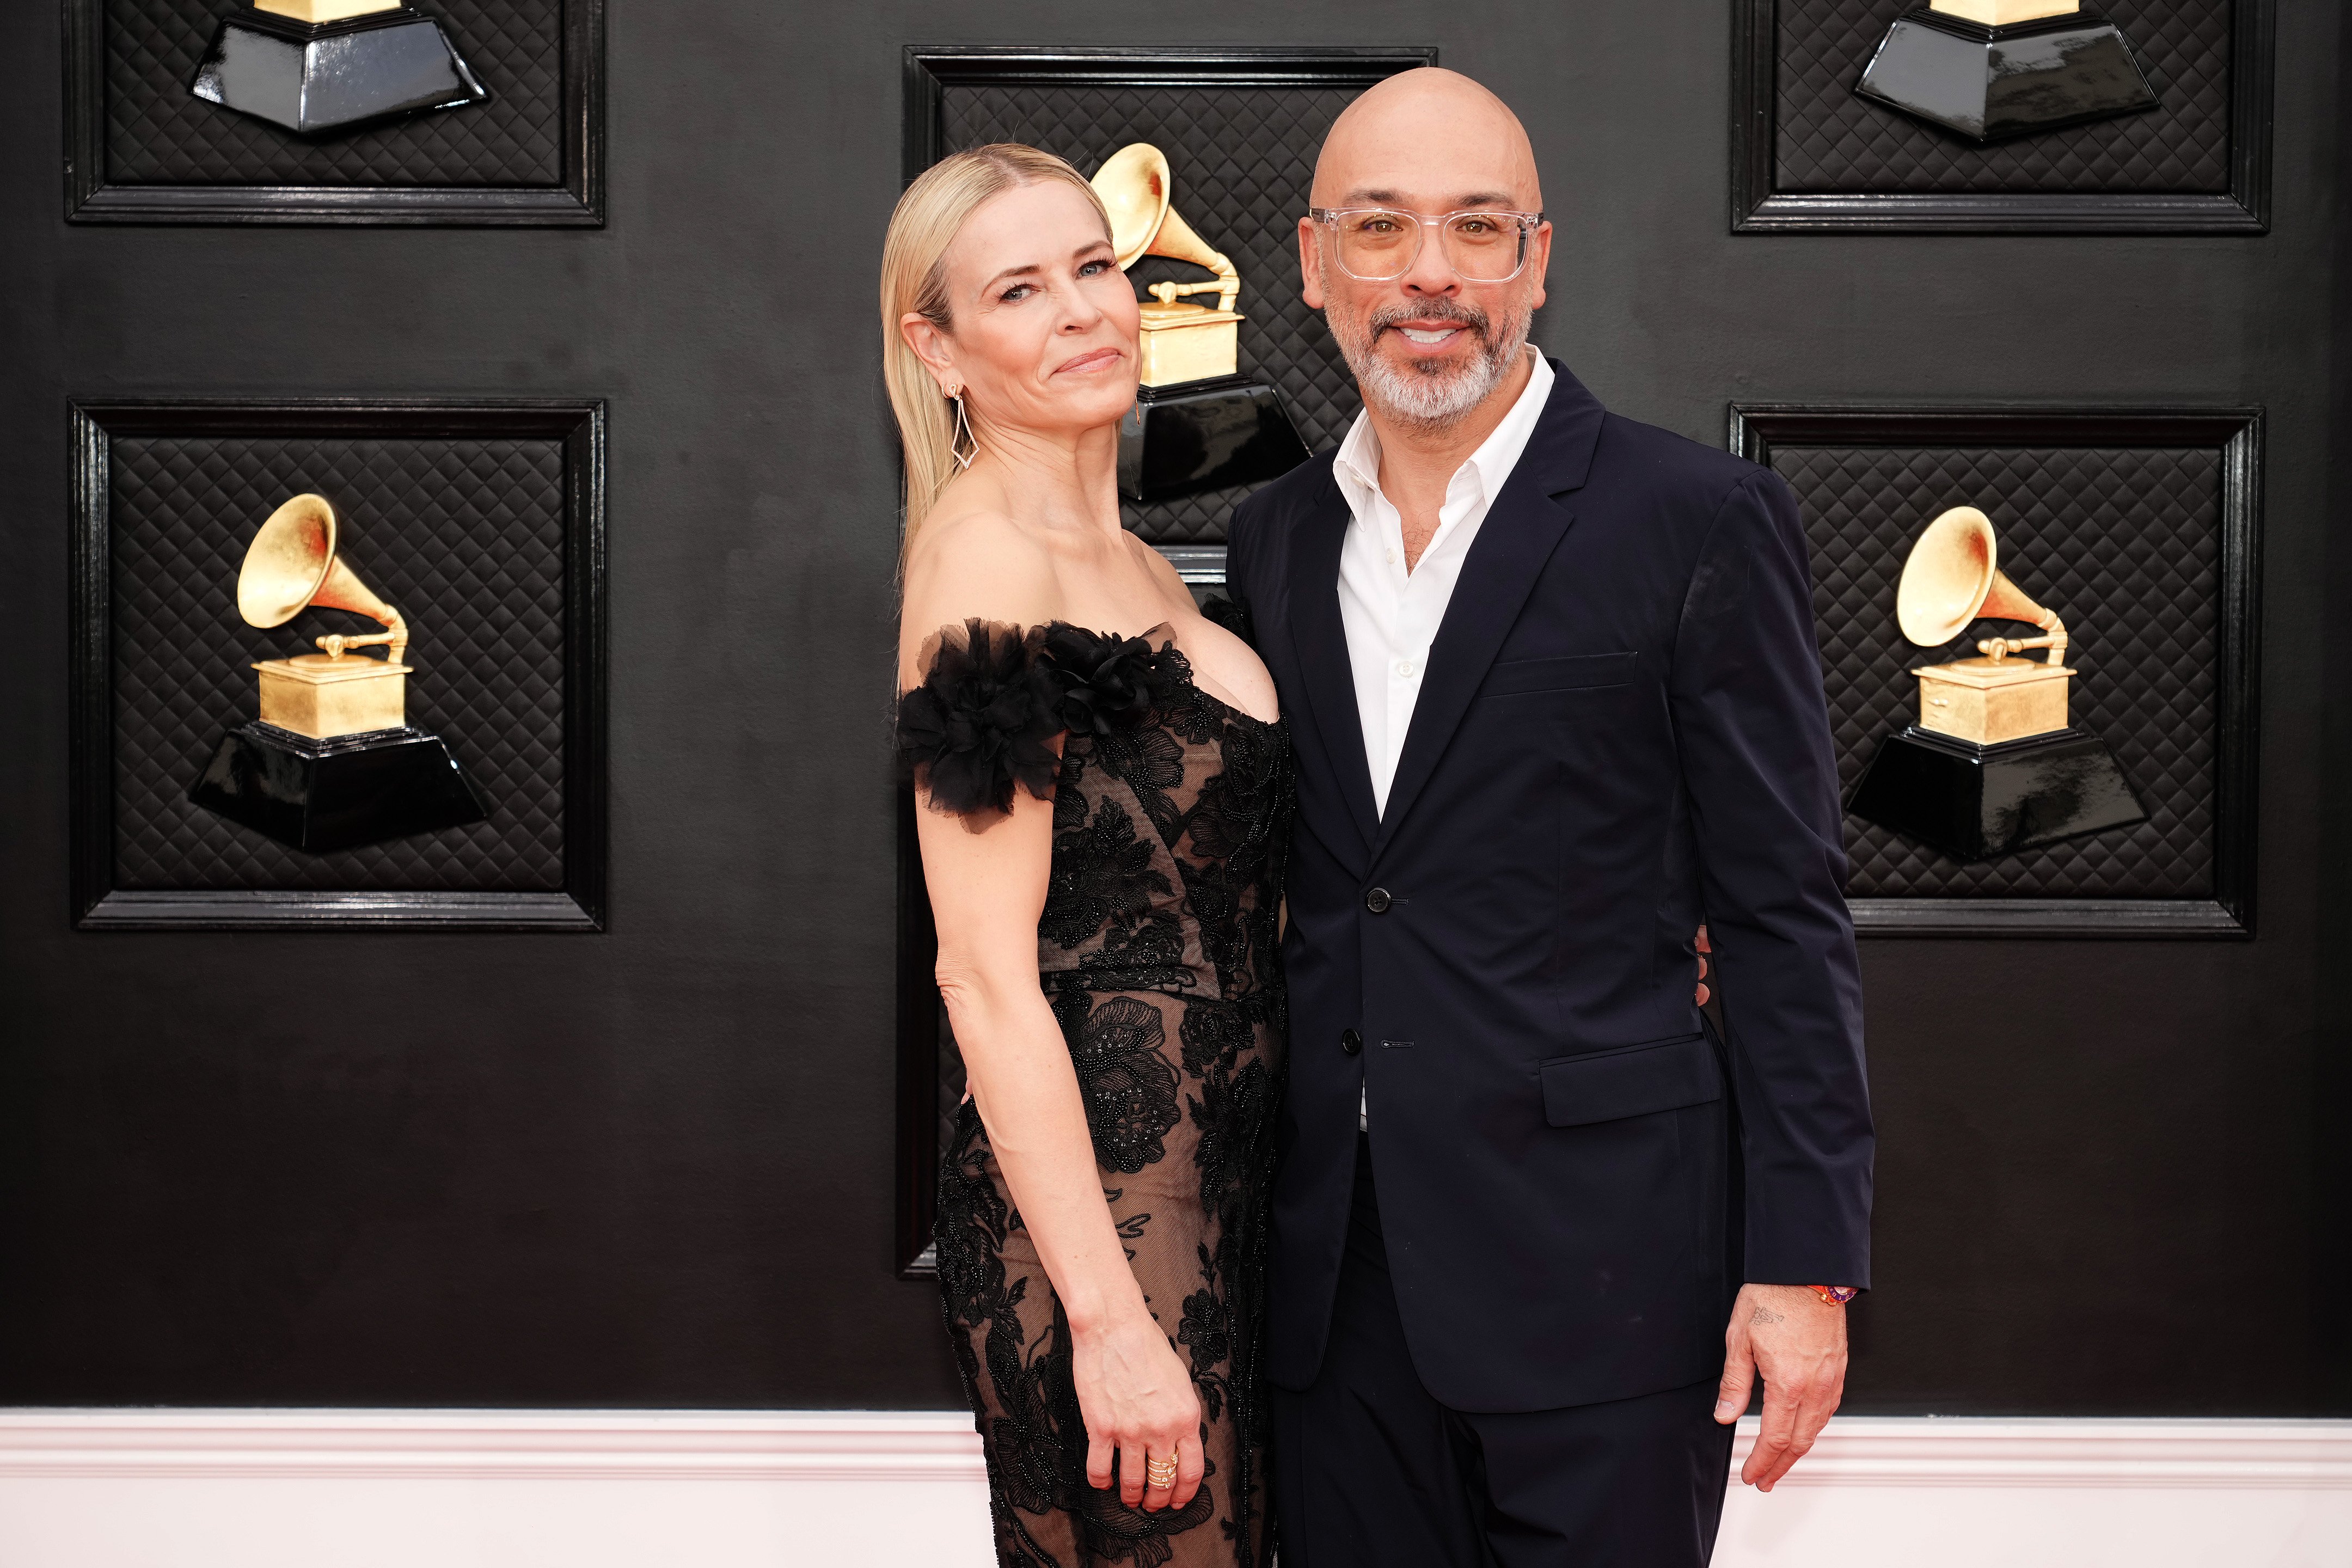 Chelsea Handler and Jo Koy at the 64th Annual Grammy Awards